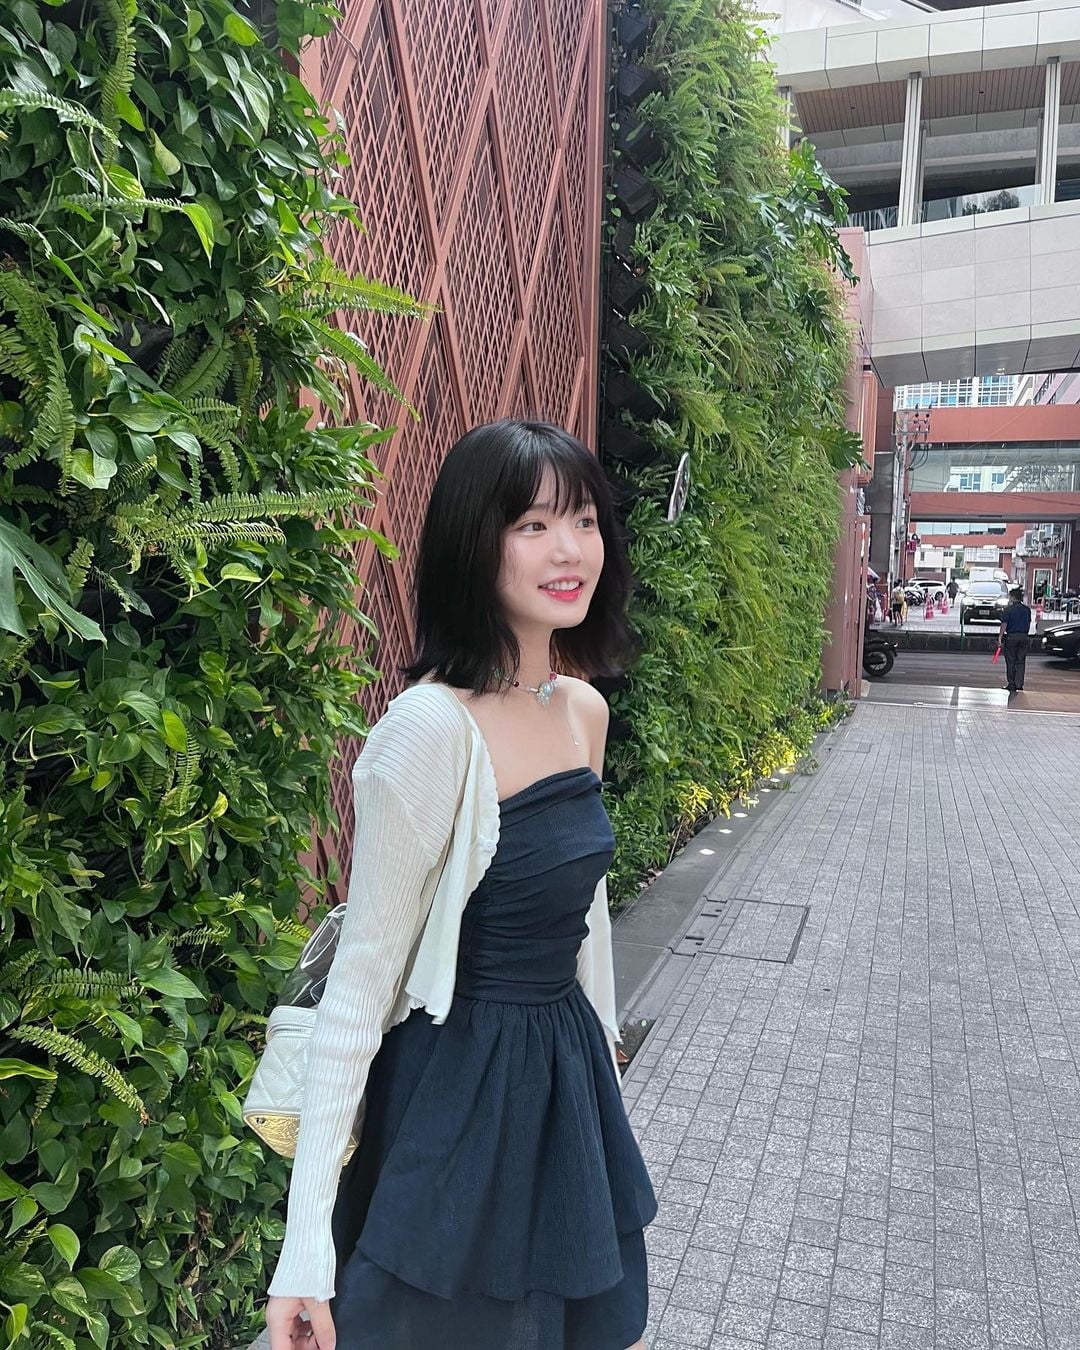 Yubi Lee, showing off her unbelievable youthful beauty at 33 years old... I can debut as an idol